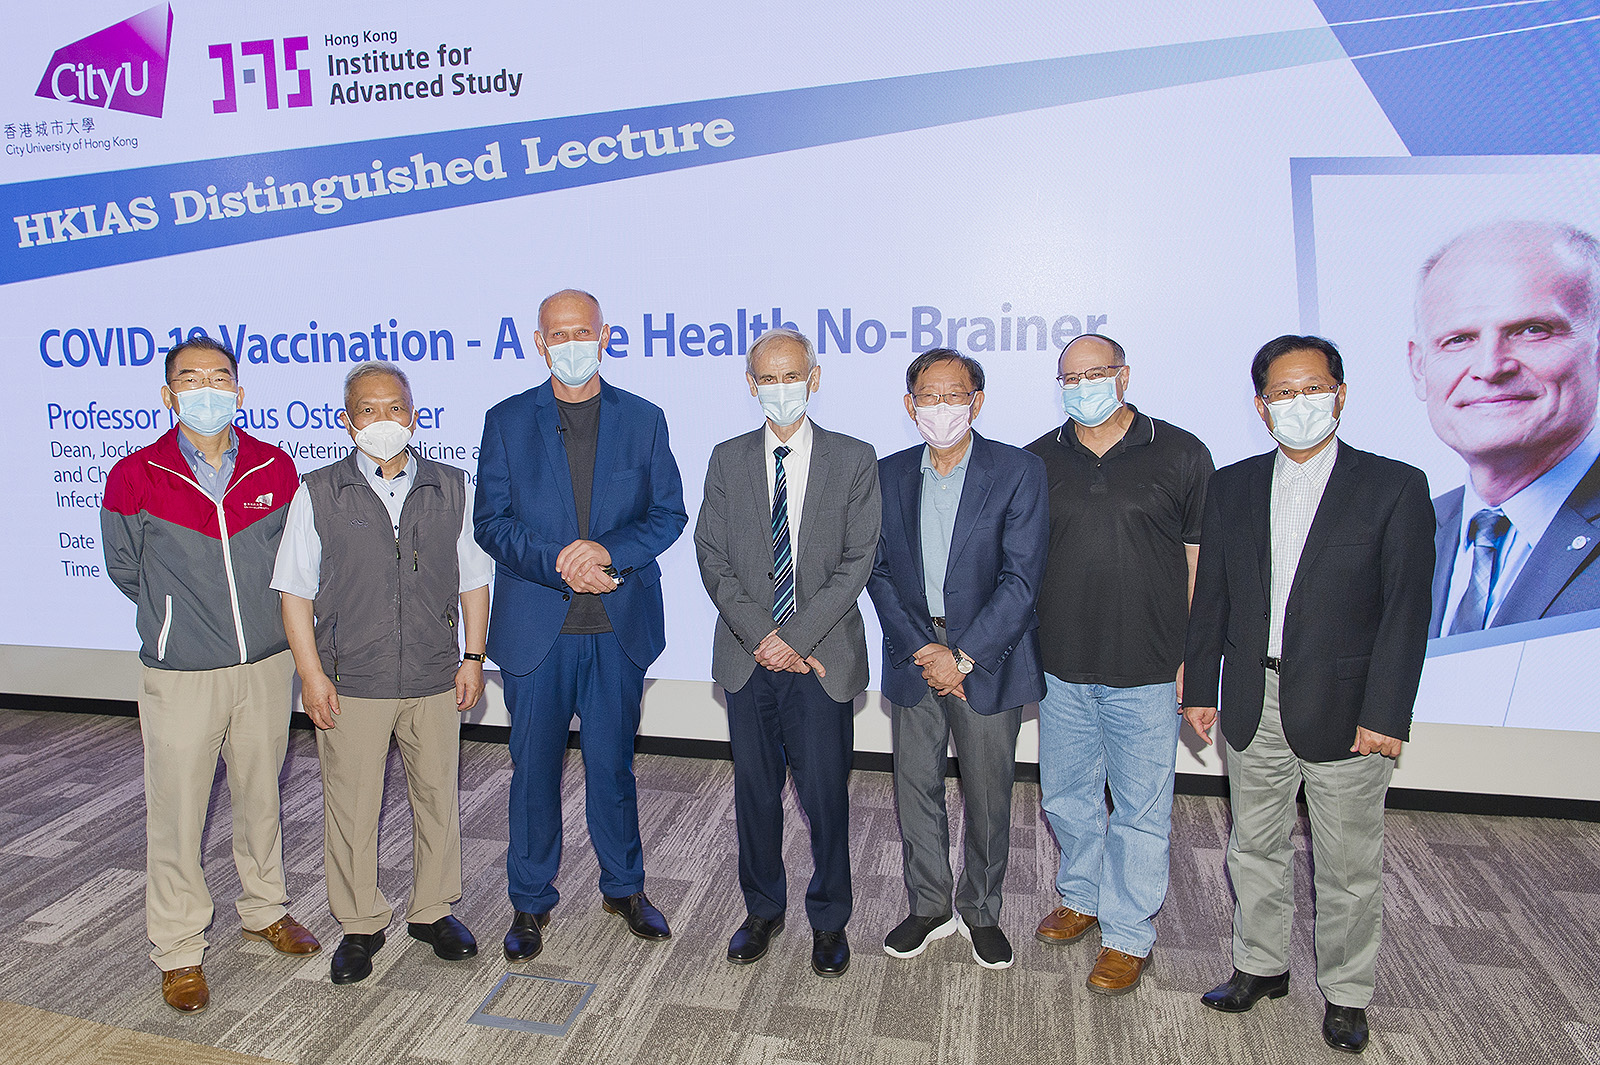 Professor Michael Yang Mengsu, Vice-President (Research and Technology) of CityU (first from left), Professor Jacob C. Huang, Executive Director of HKIAS (first from right), and Fellows of HKIAS attended Professor Osterrieder (third from left)’s talk titled “Covid-19 Vaccination - A One Health No-Brainer”. 